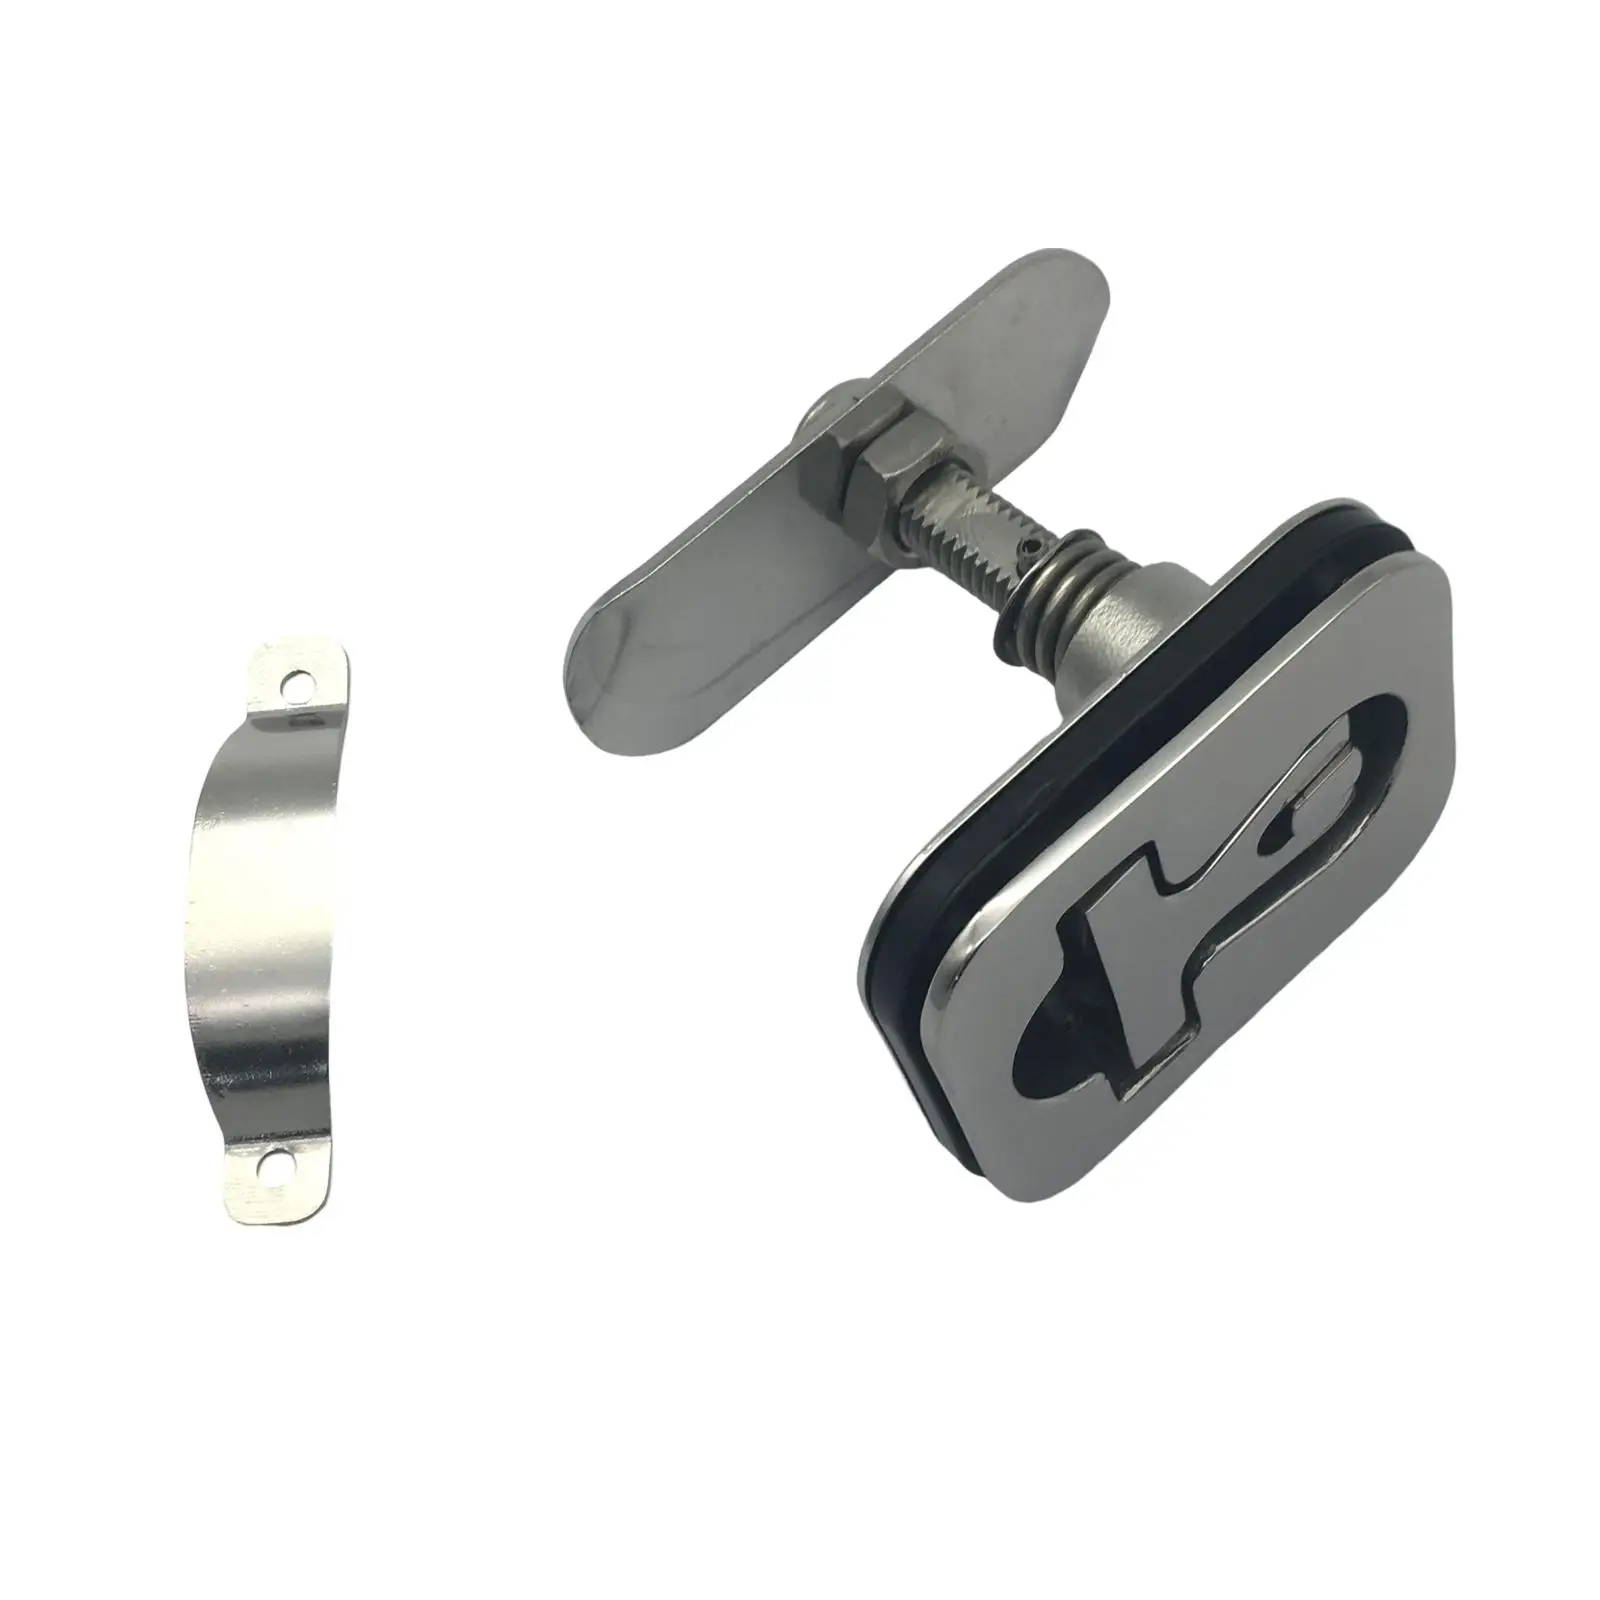 

Boat latches Replacement with Gasket Boat Deck Hatches Handle Boat latches Flush Pull Slam Latch for Marine Deck Hatch Boat